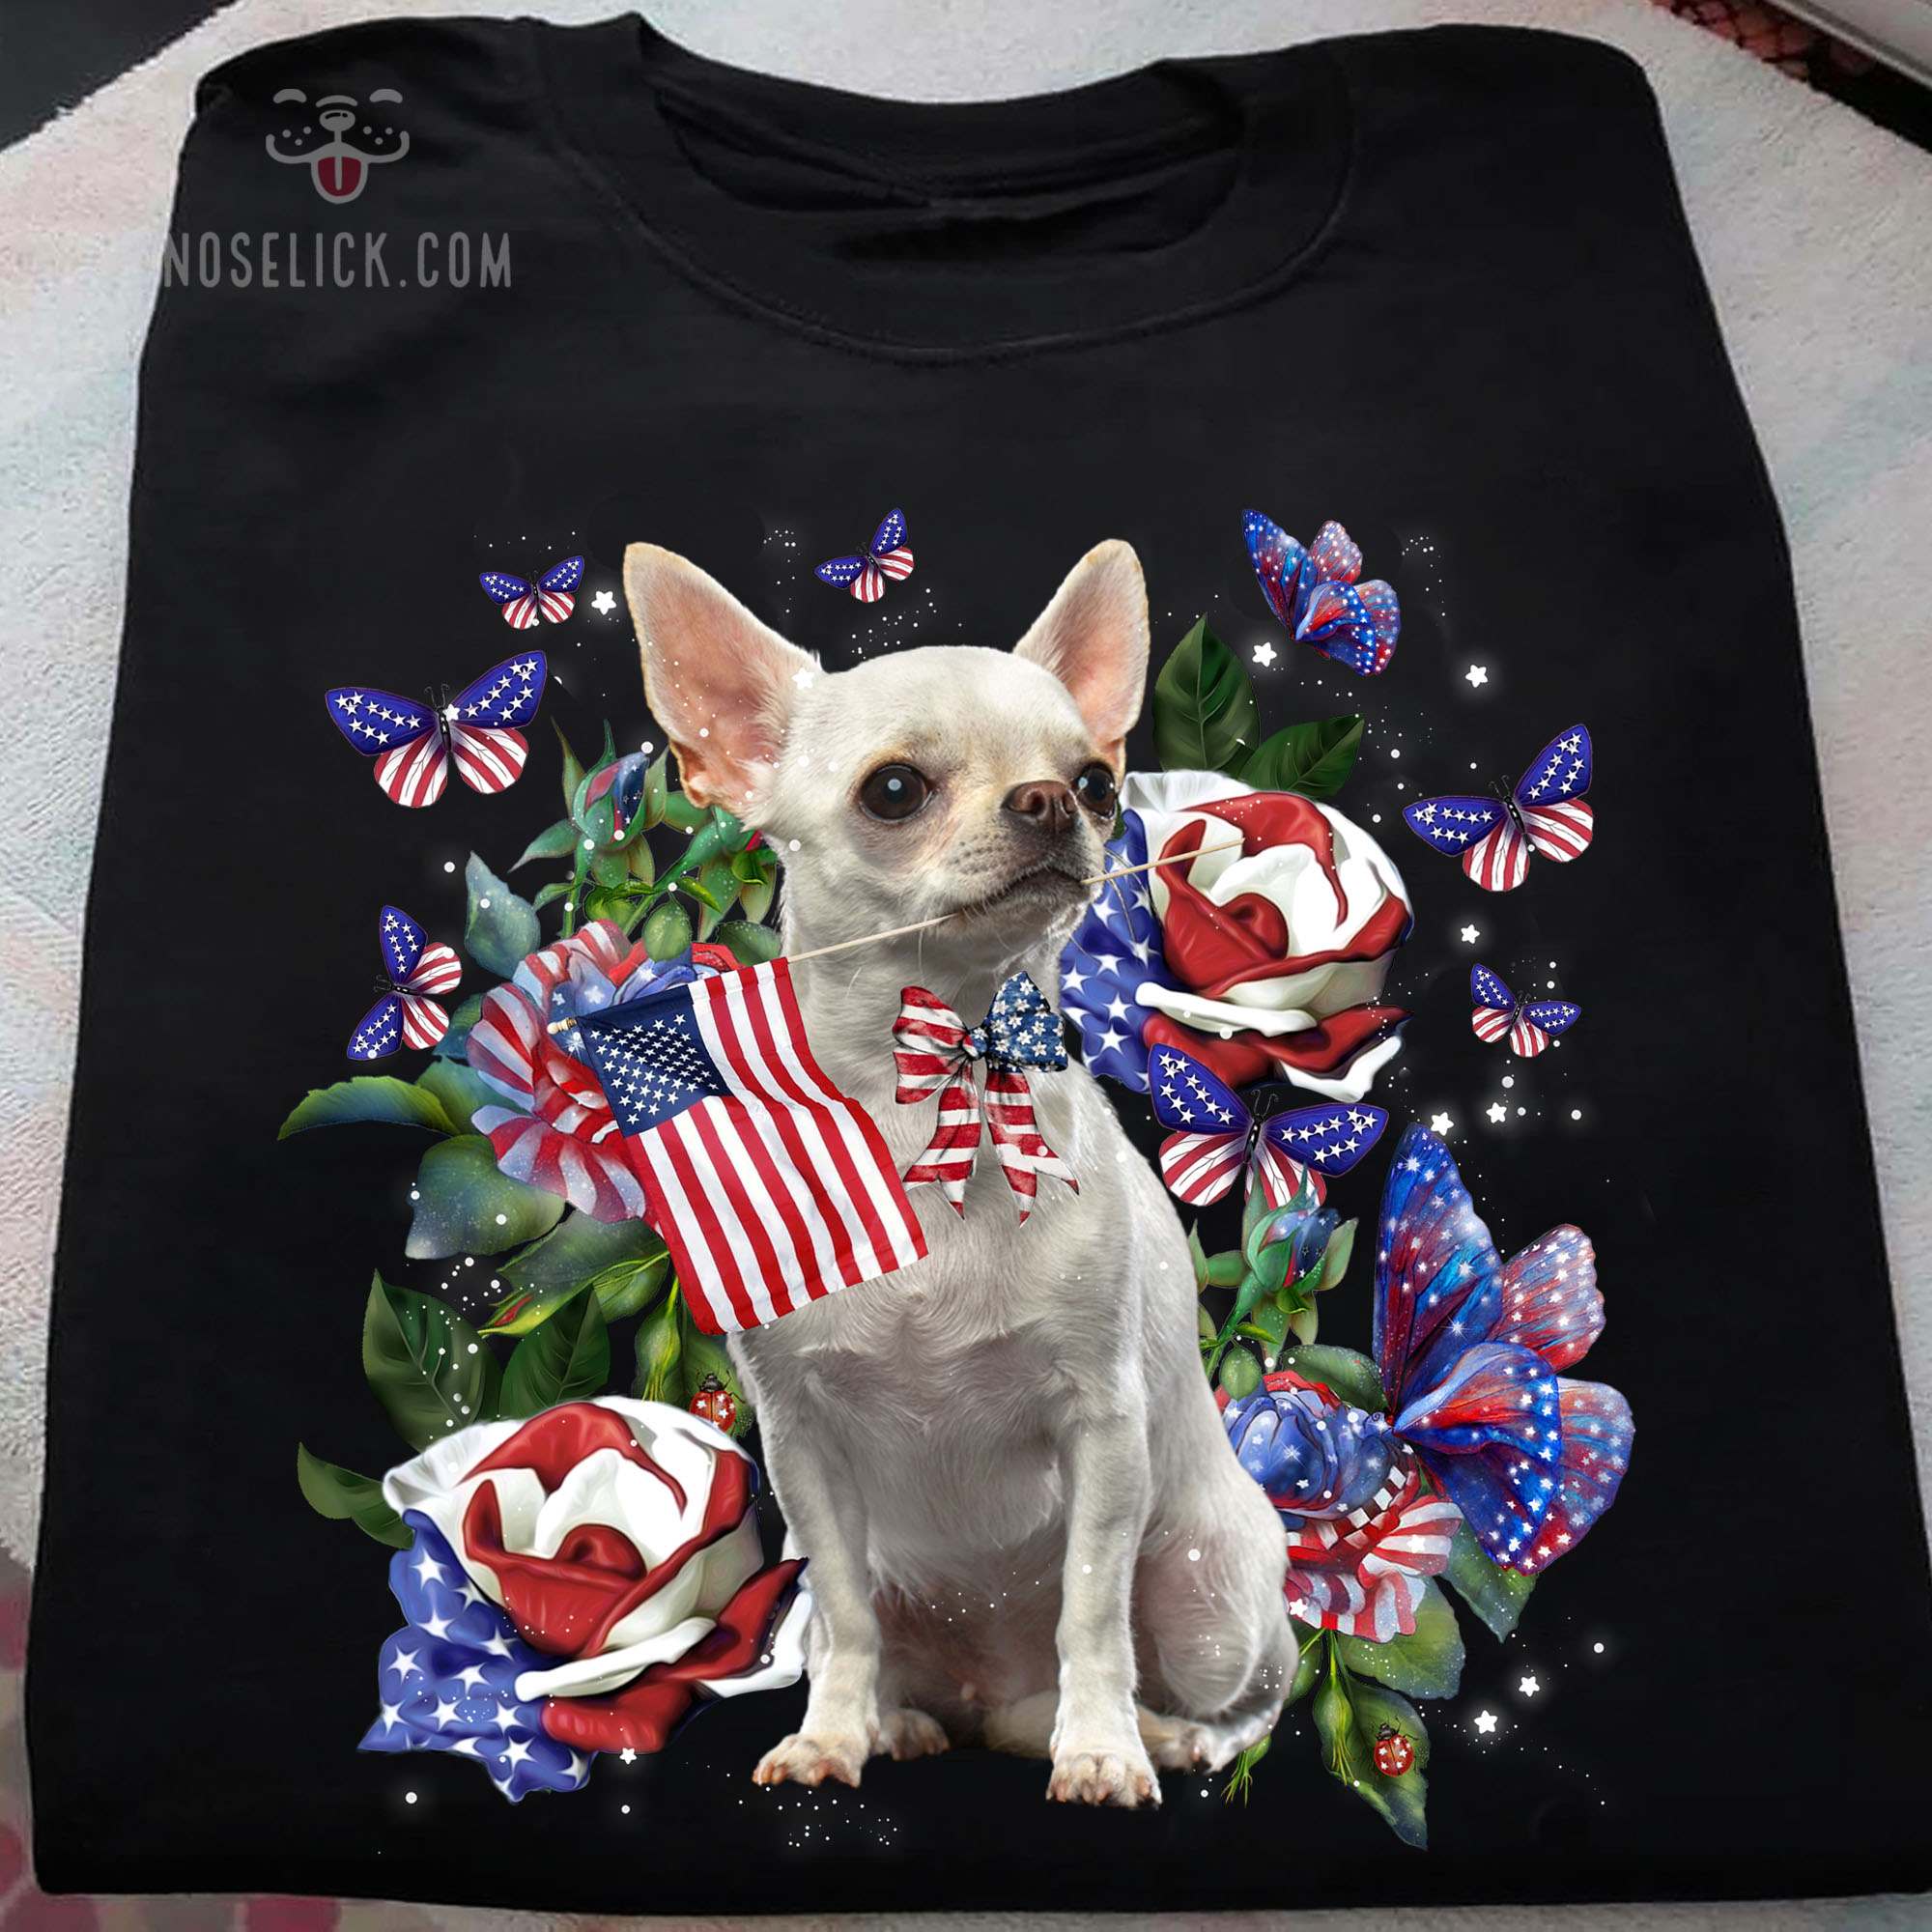 Chihuahua and America - America independence day, Chihuahua dog lover